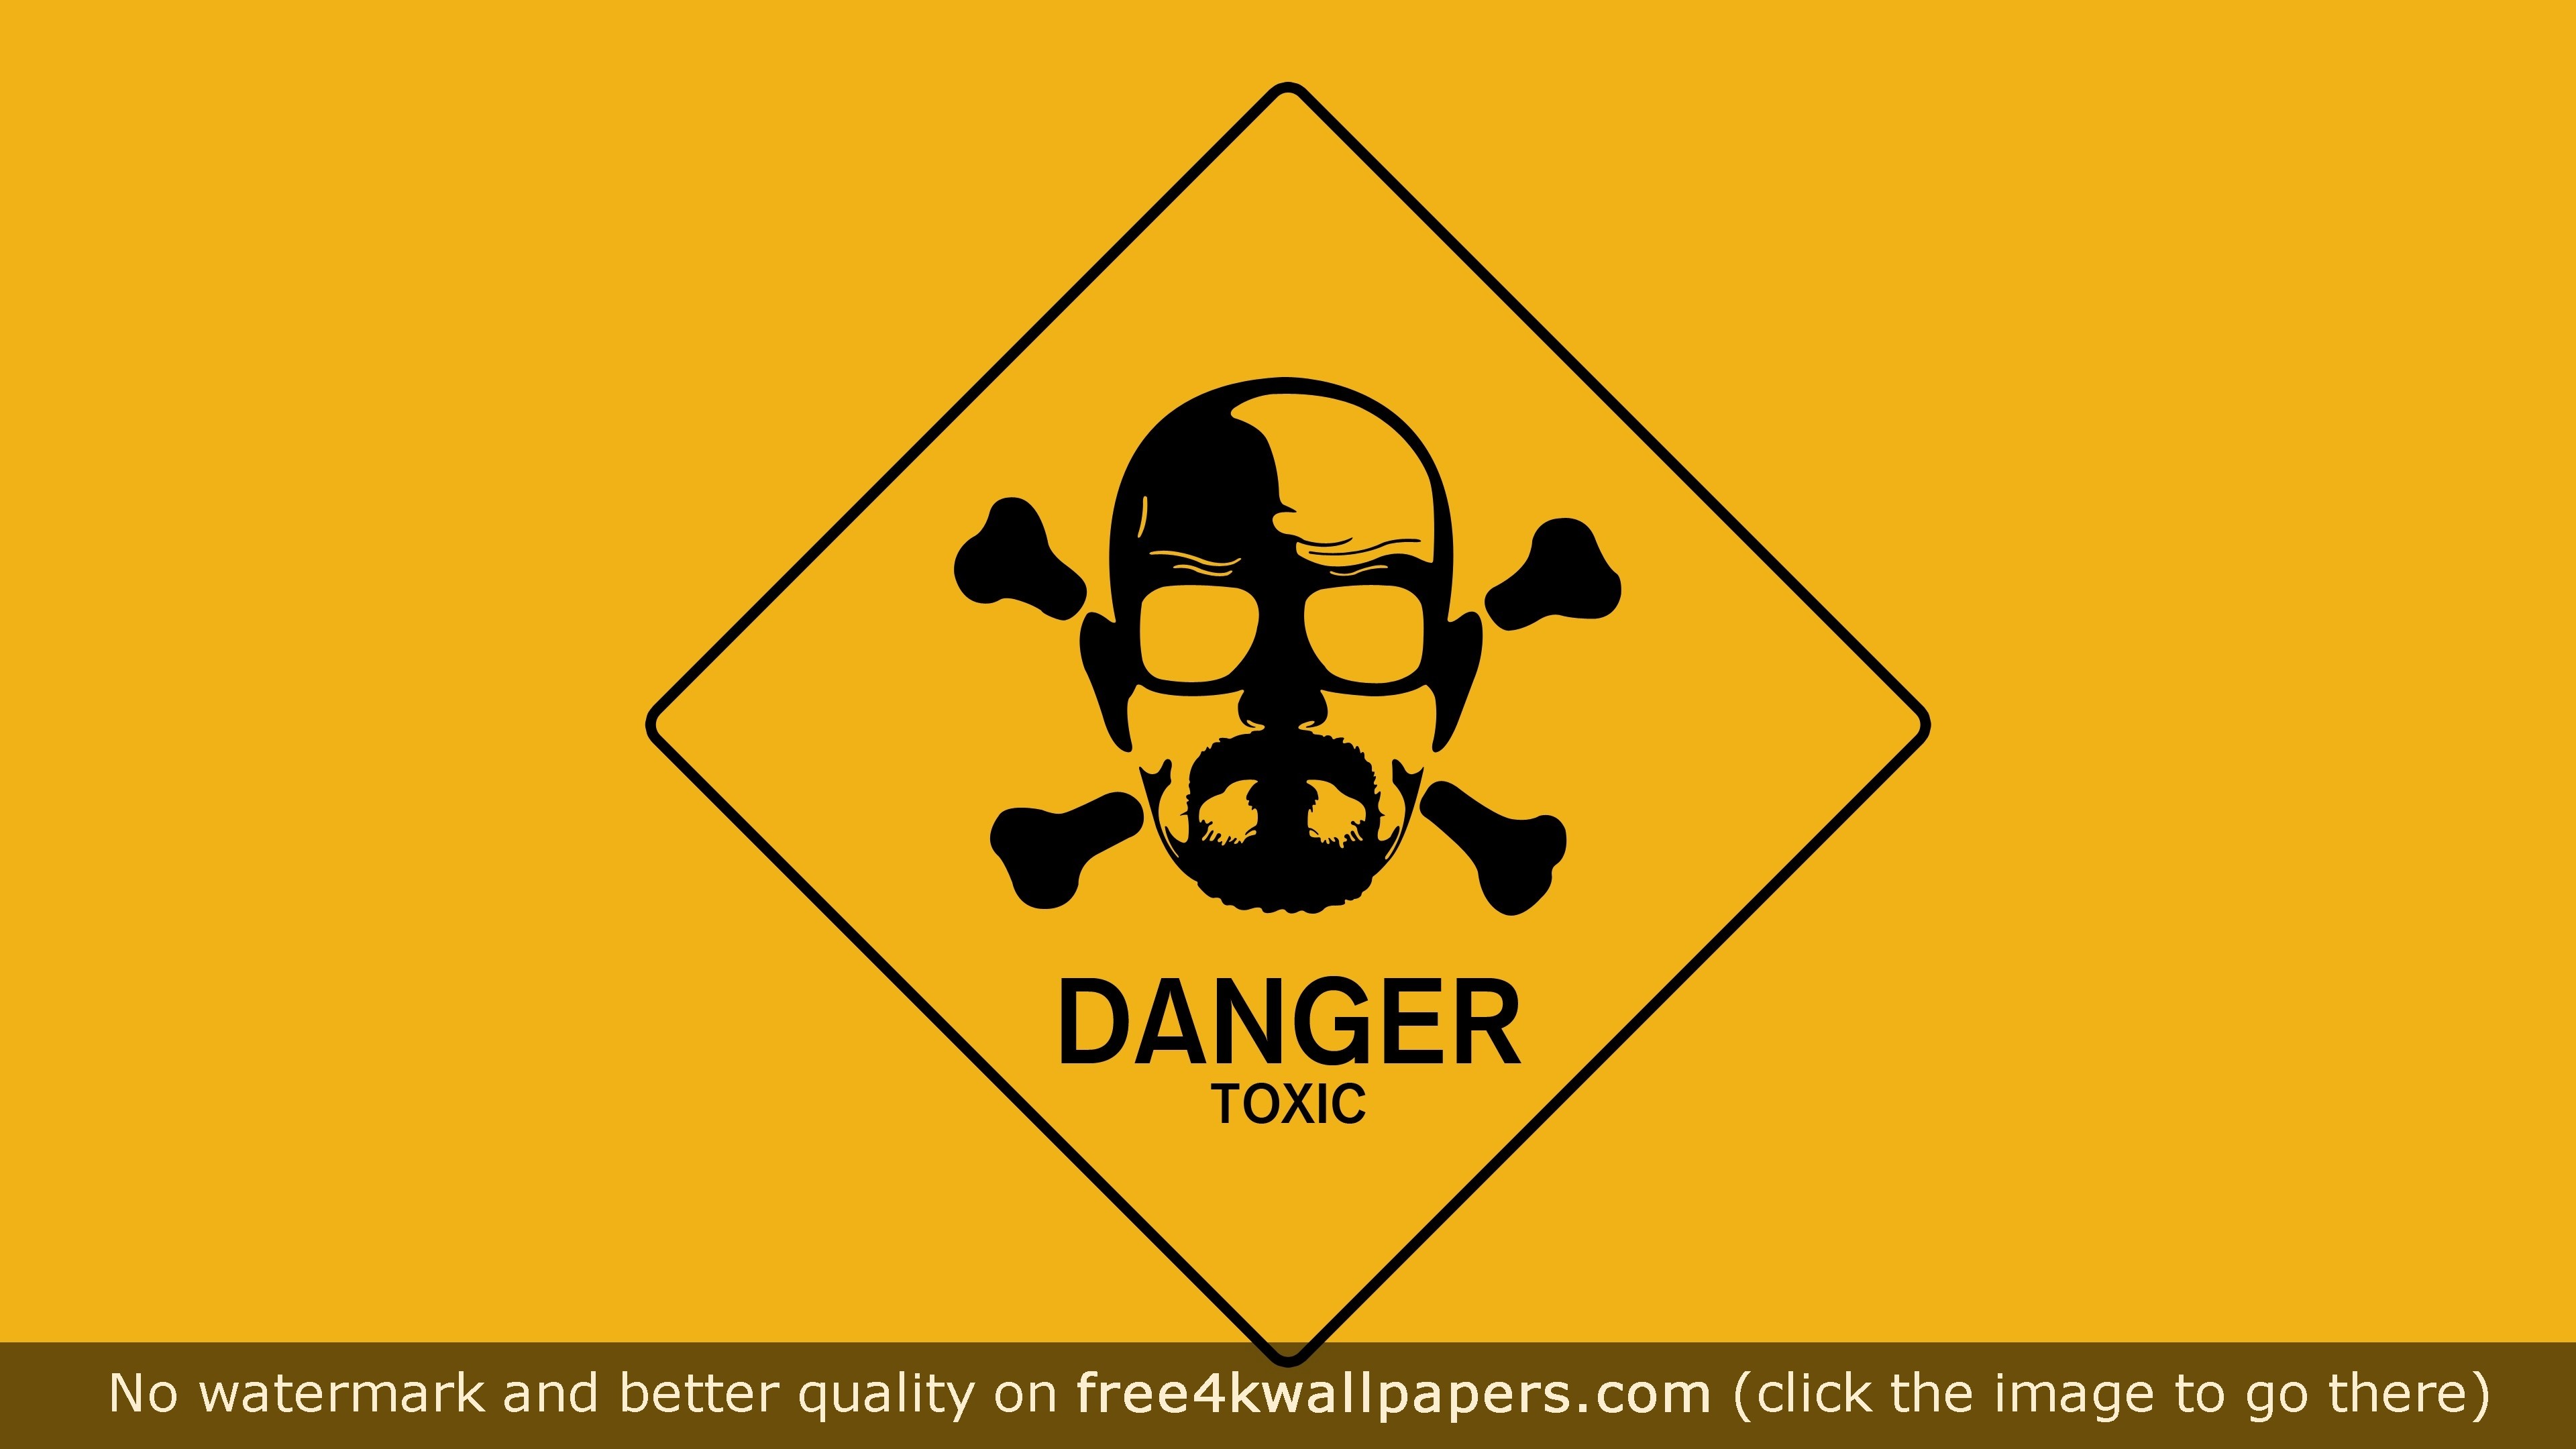 3840x2160 Breaking Bad Walt Danger Toxic Sign 4K or HD wallpaper for your PC, Mac or